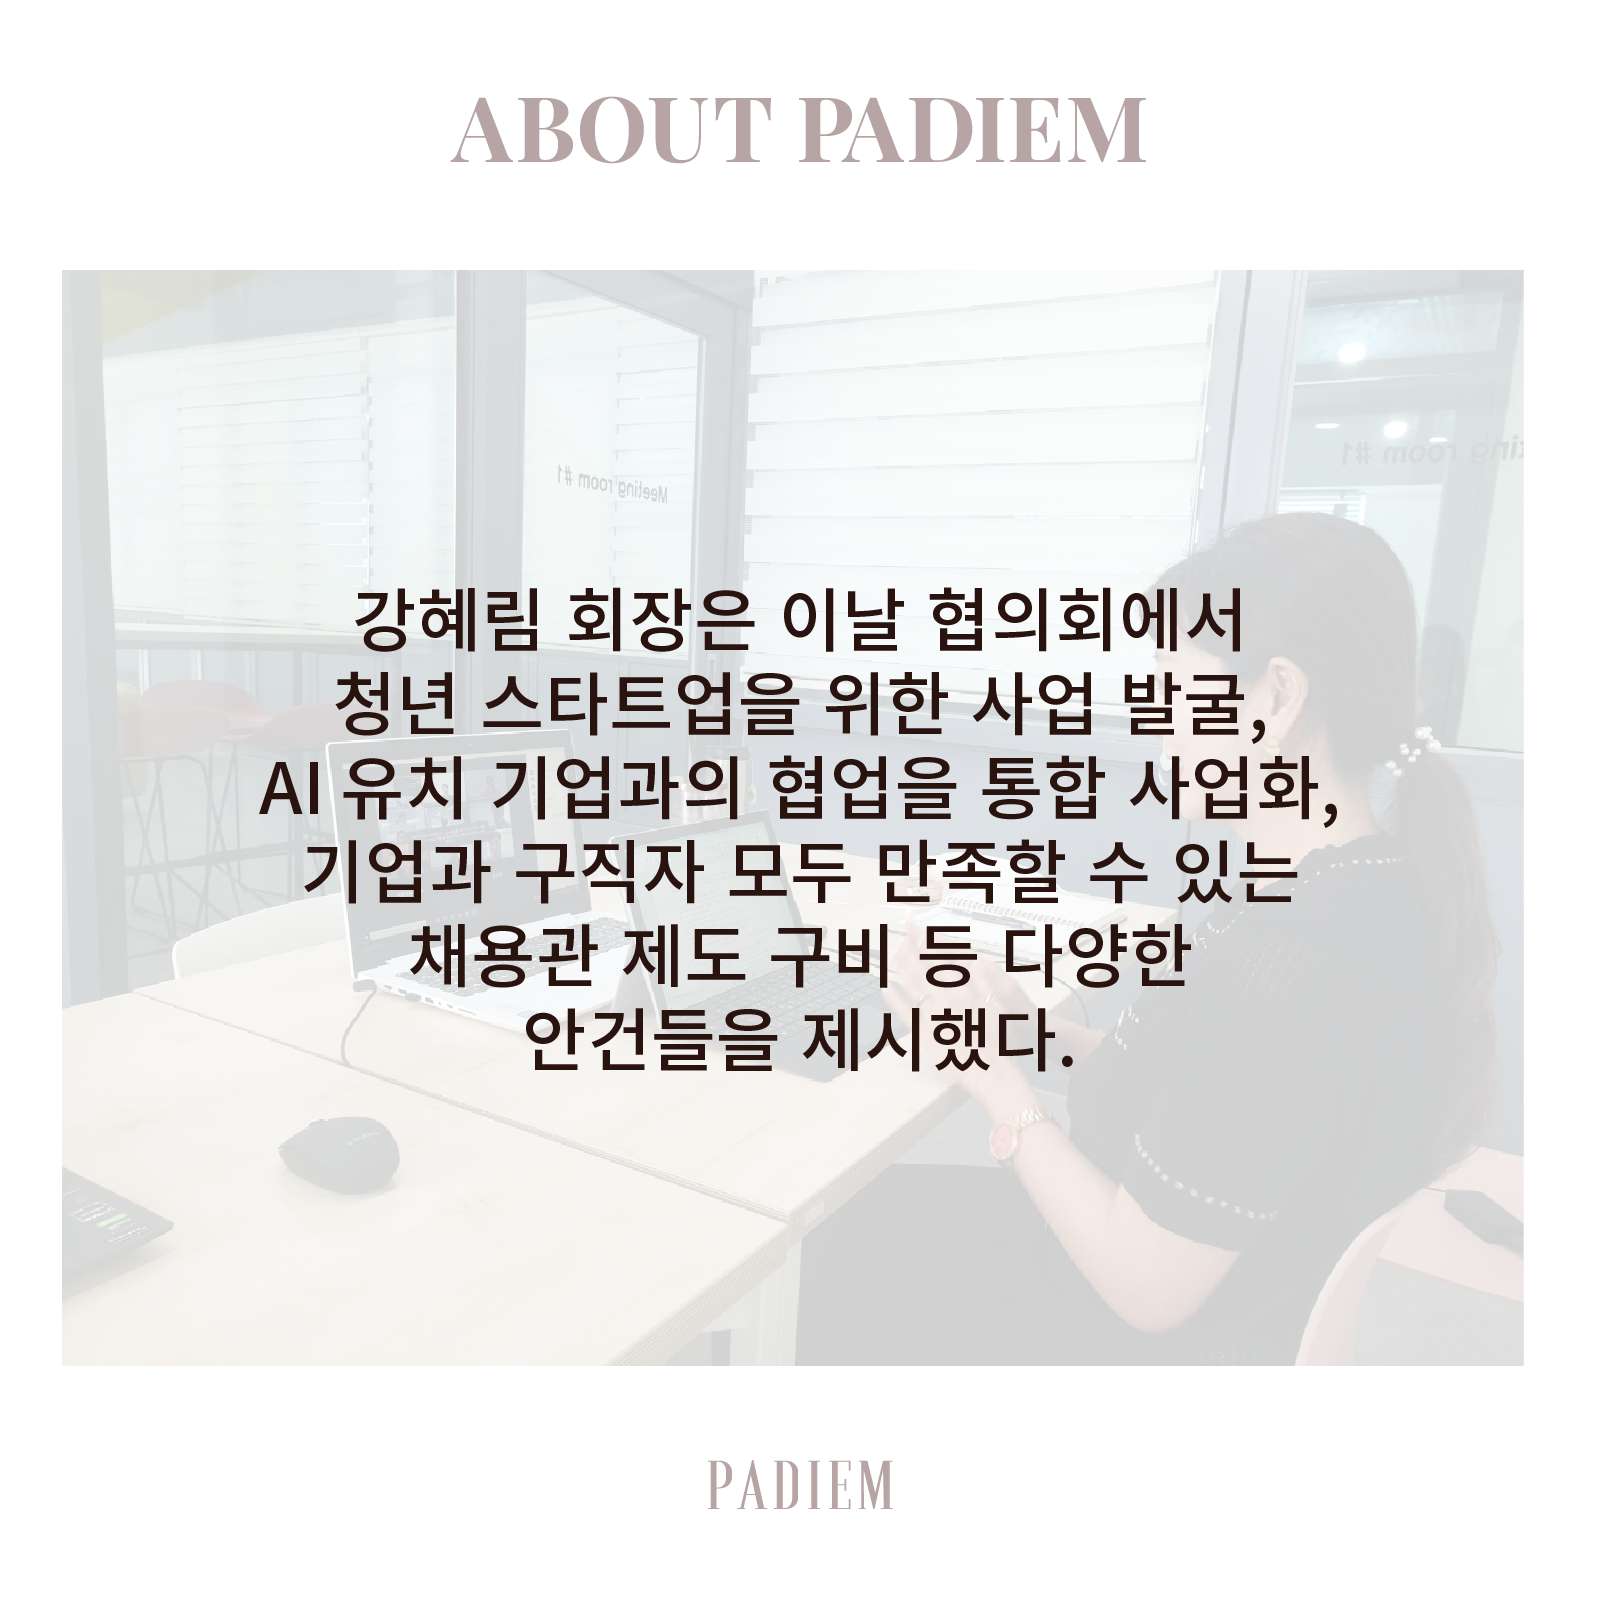 0728_AI협의회3@2x.png